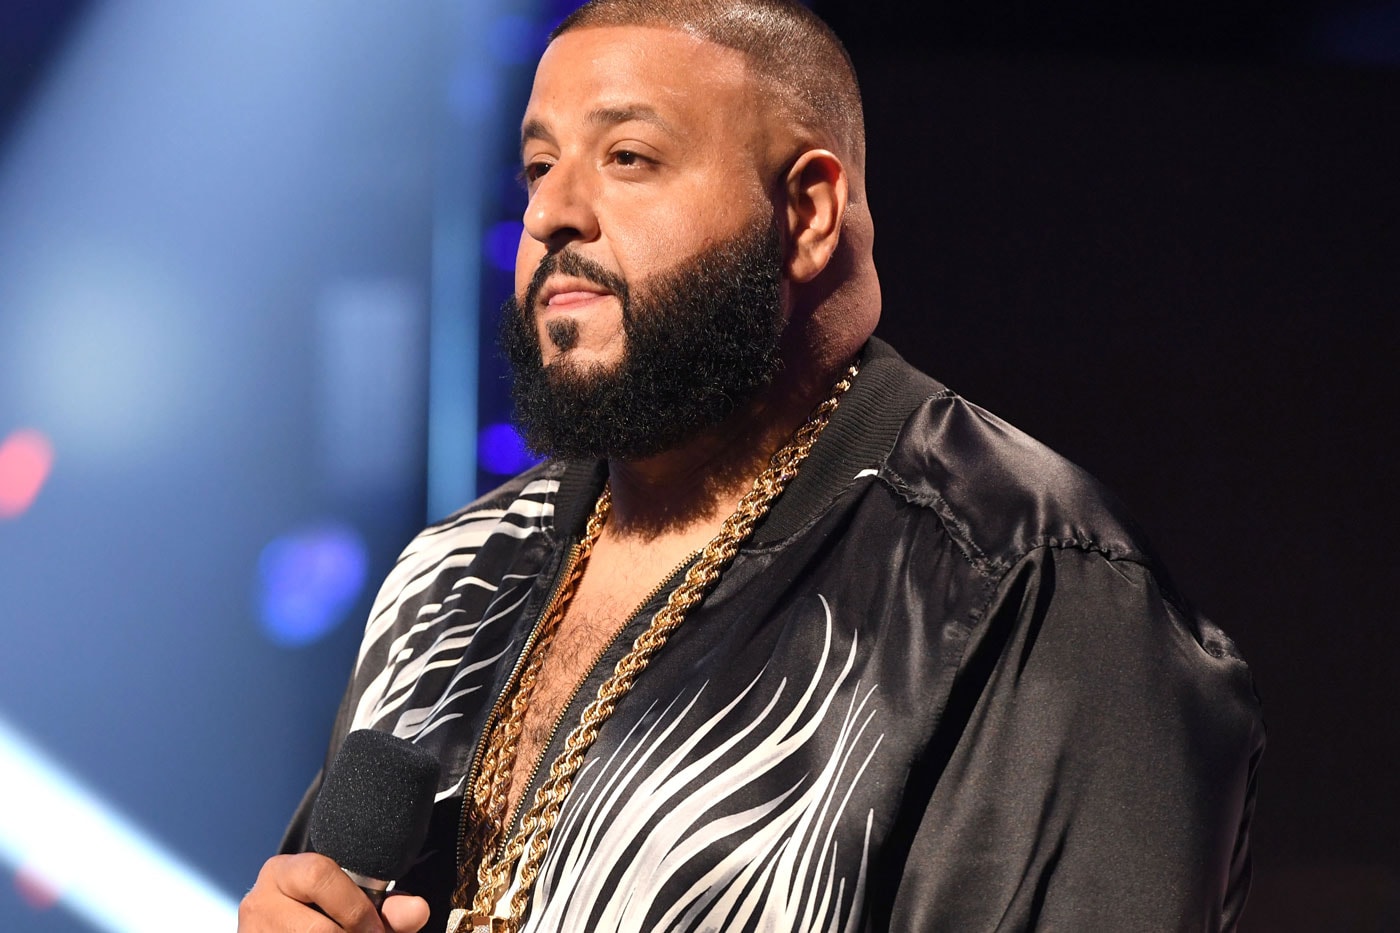 DJ Khaled Is Set to Score His First No. 1 Album with 'Major Key'